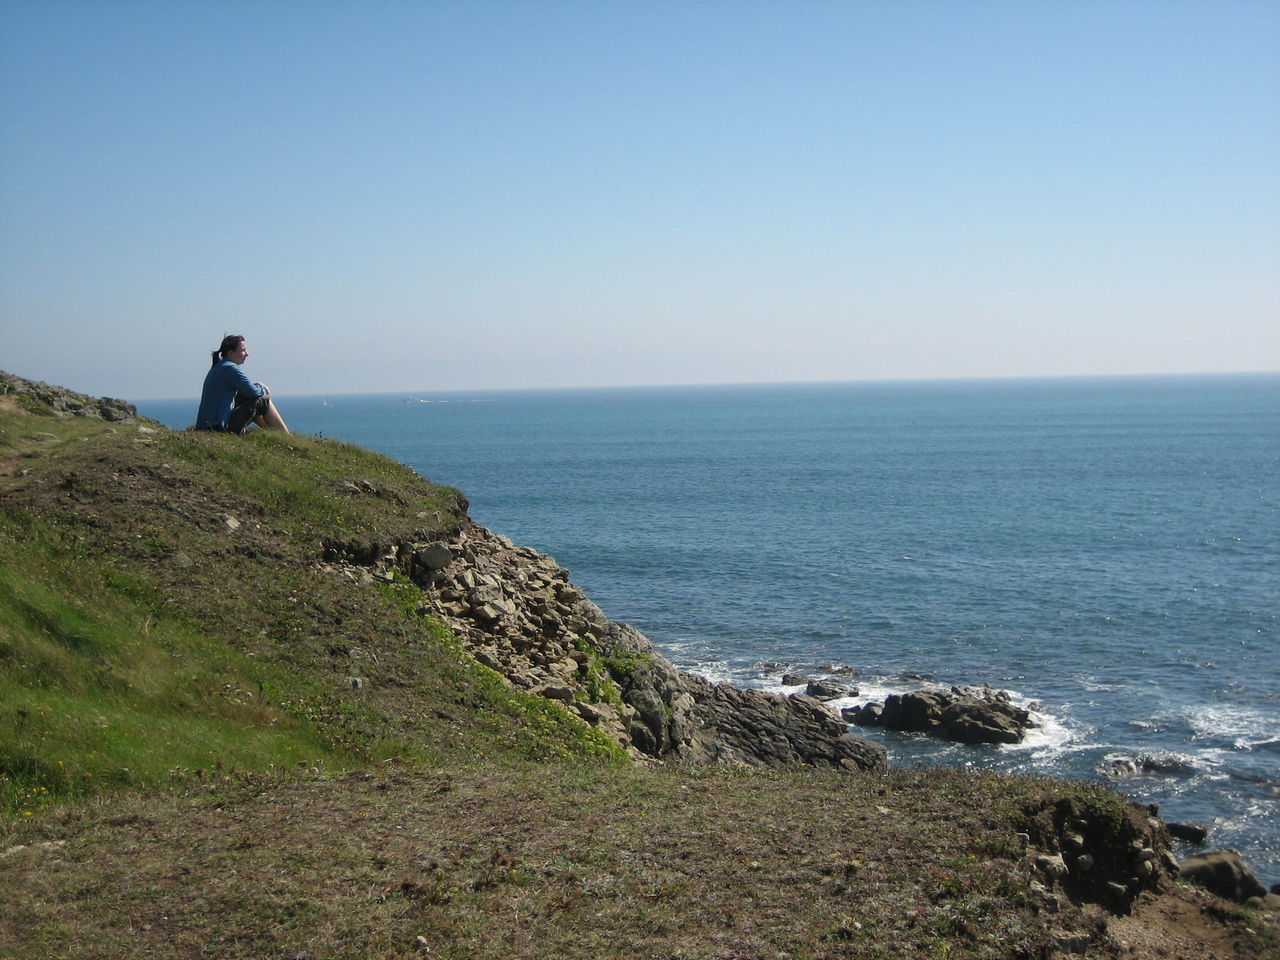 MAN STANDING ON SHORE AGAINST CLEAR SKY